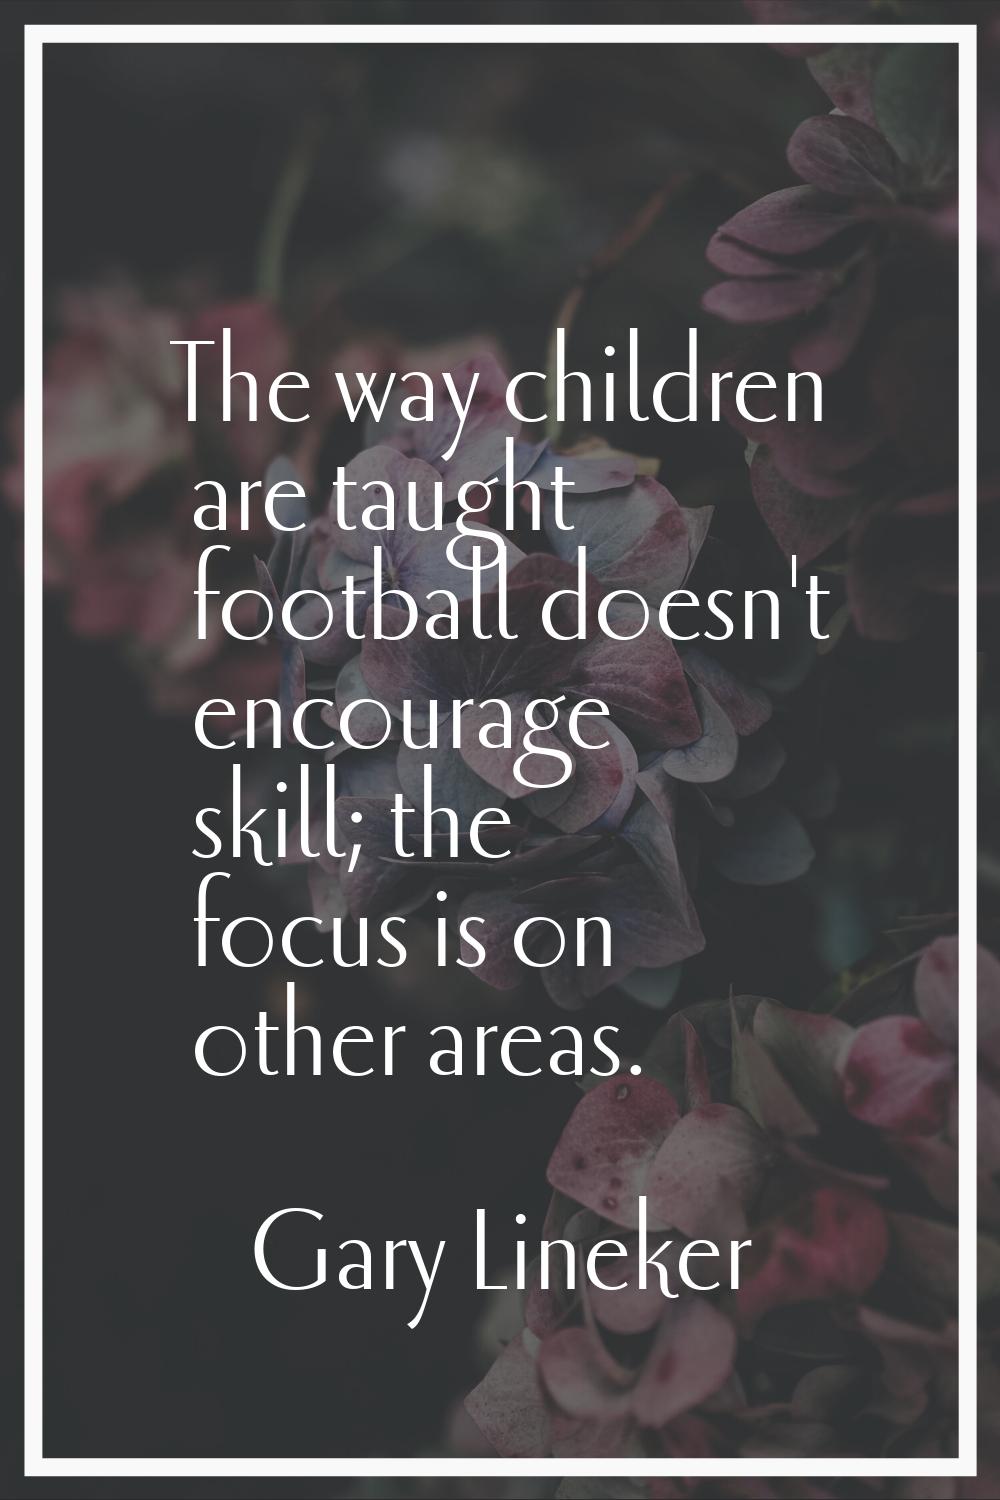 The way children are taught football doesn't encourage skill; the focus is on other areas.